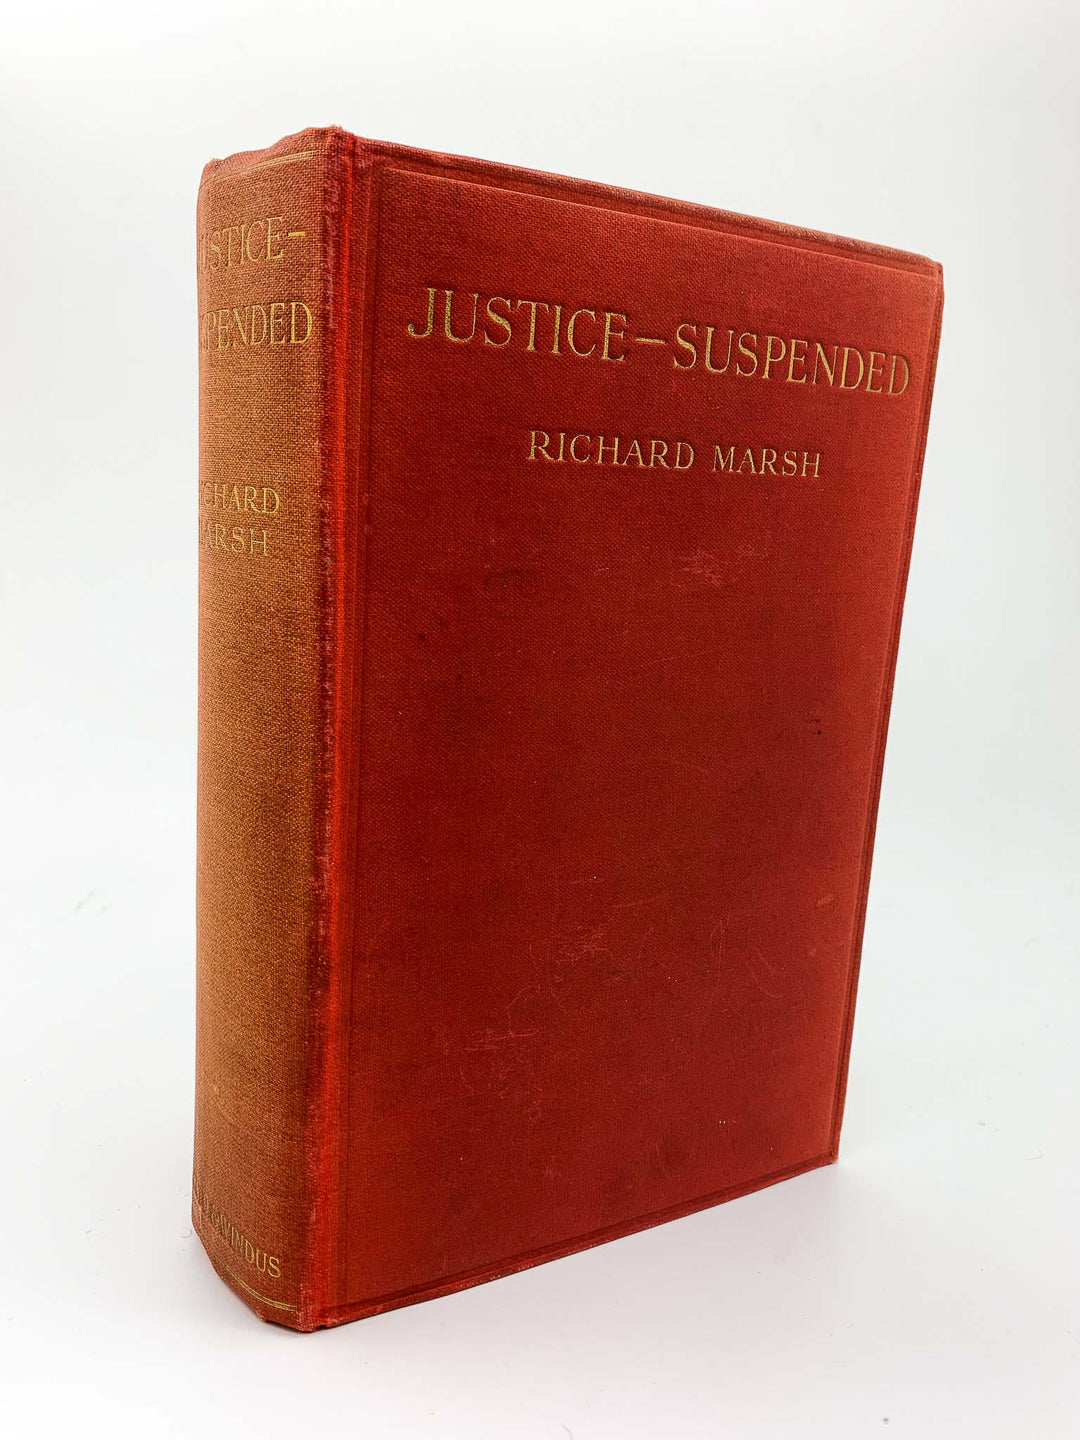 Marsh, Richard - Justice Suspended | front cover